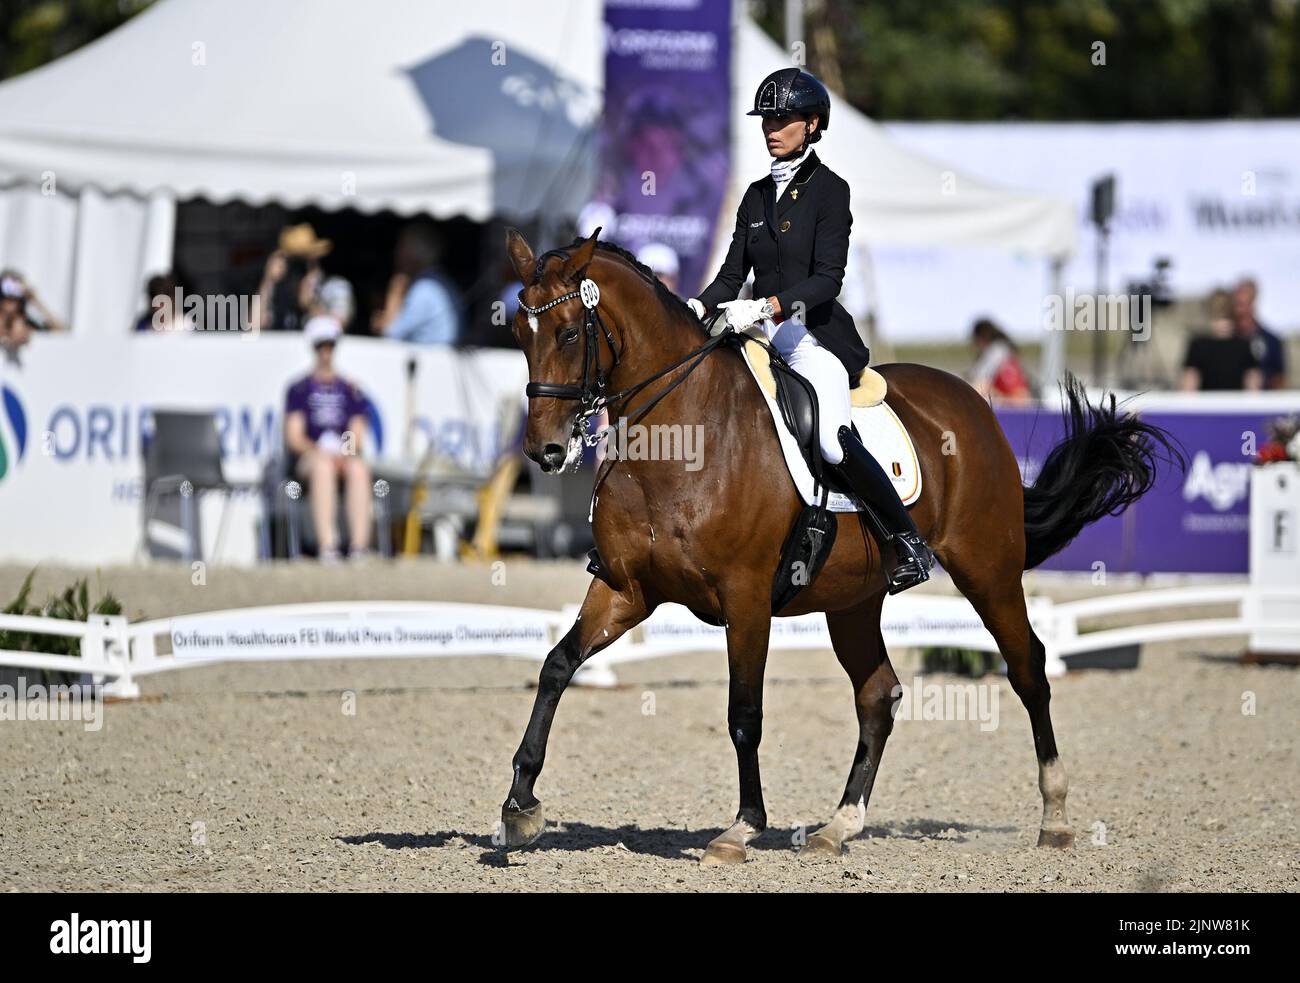 Herning, Denmark. 13th Aug, 2022. World Equestrian Games.Michèle George (BEL) riding BEST OF 8 during the FEI Para Dressage Team championships - Grade III. Credit: Sport In Pictures/Alamy Live News Stock Photo